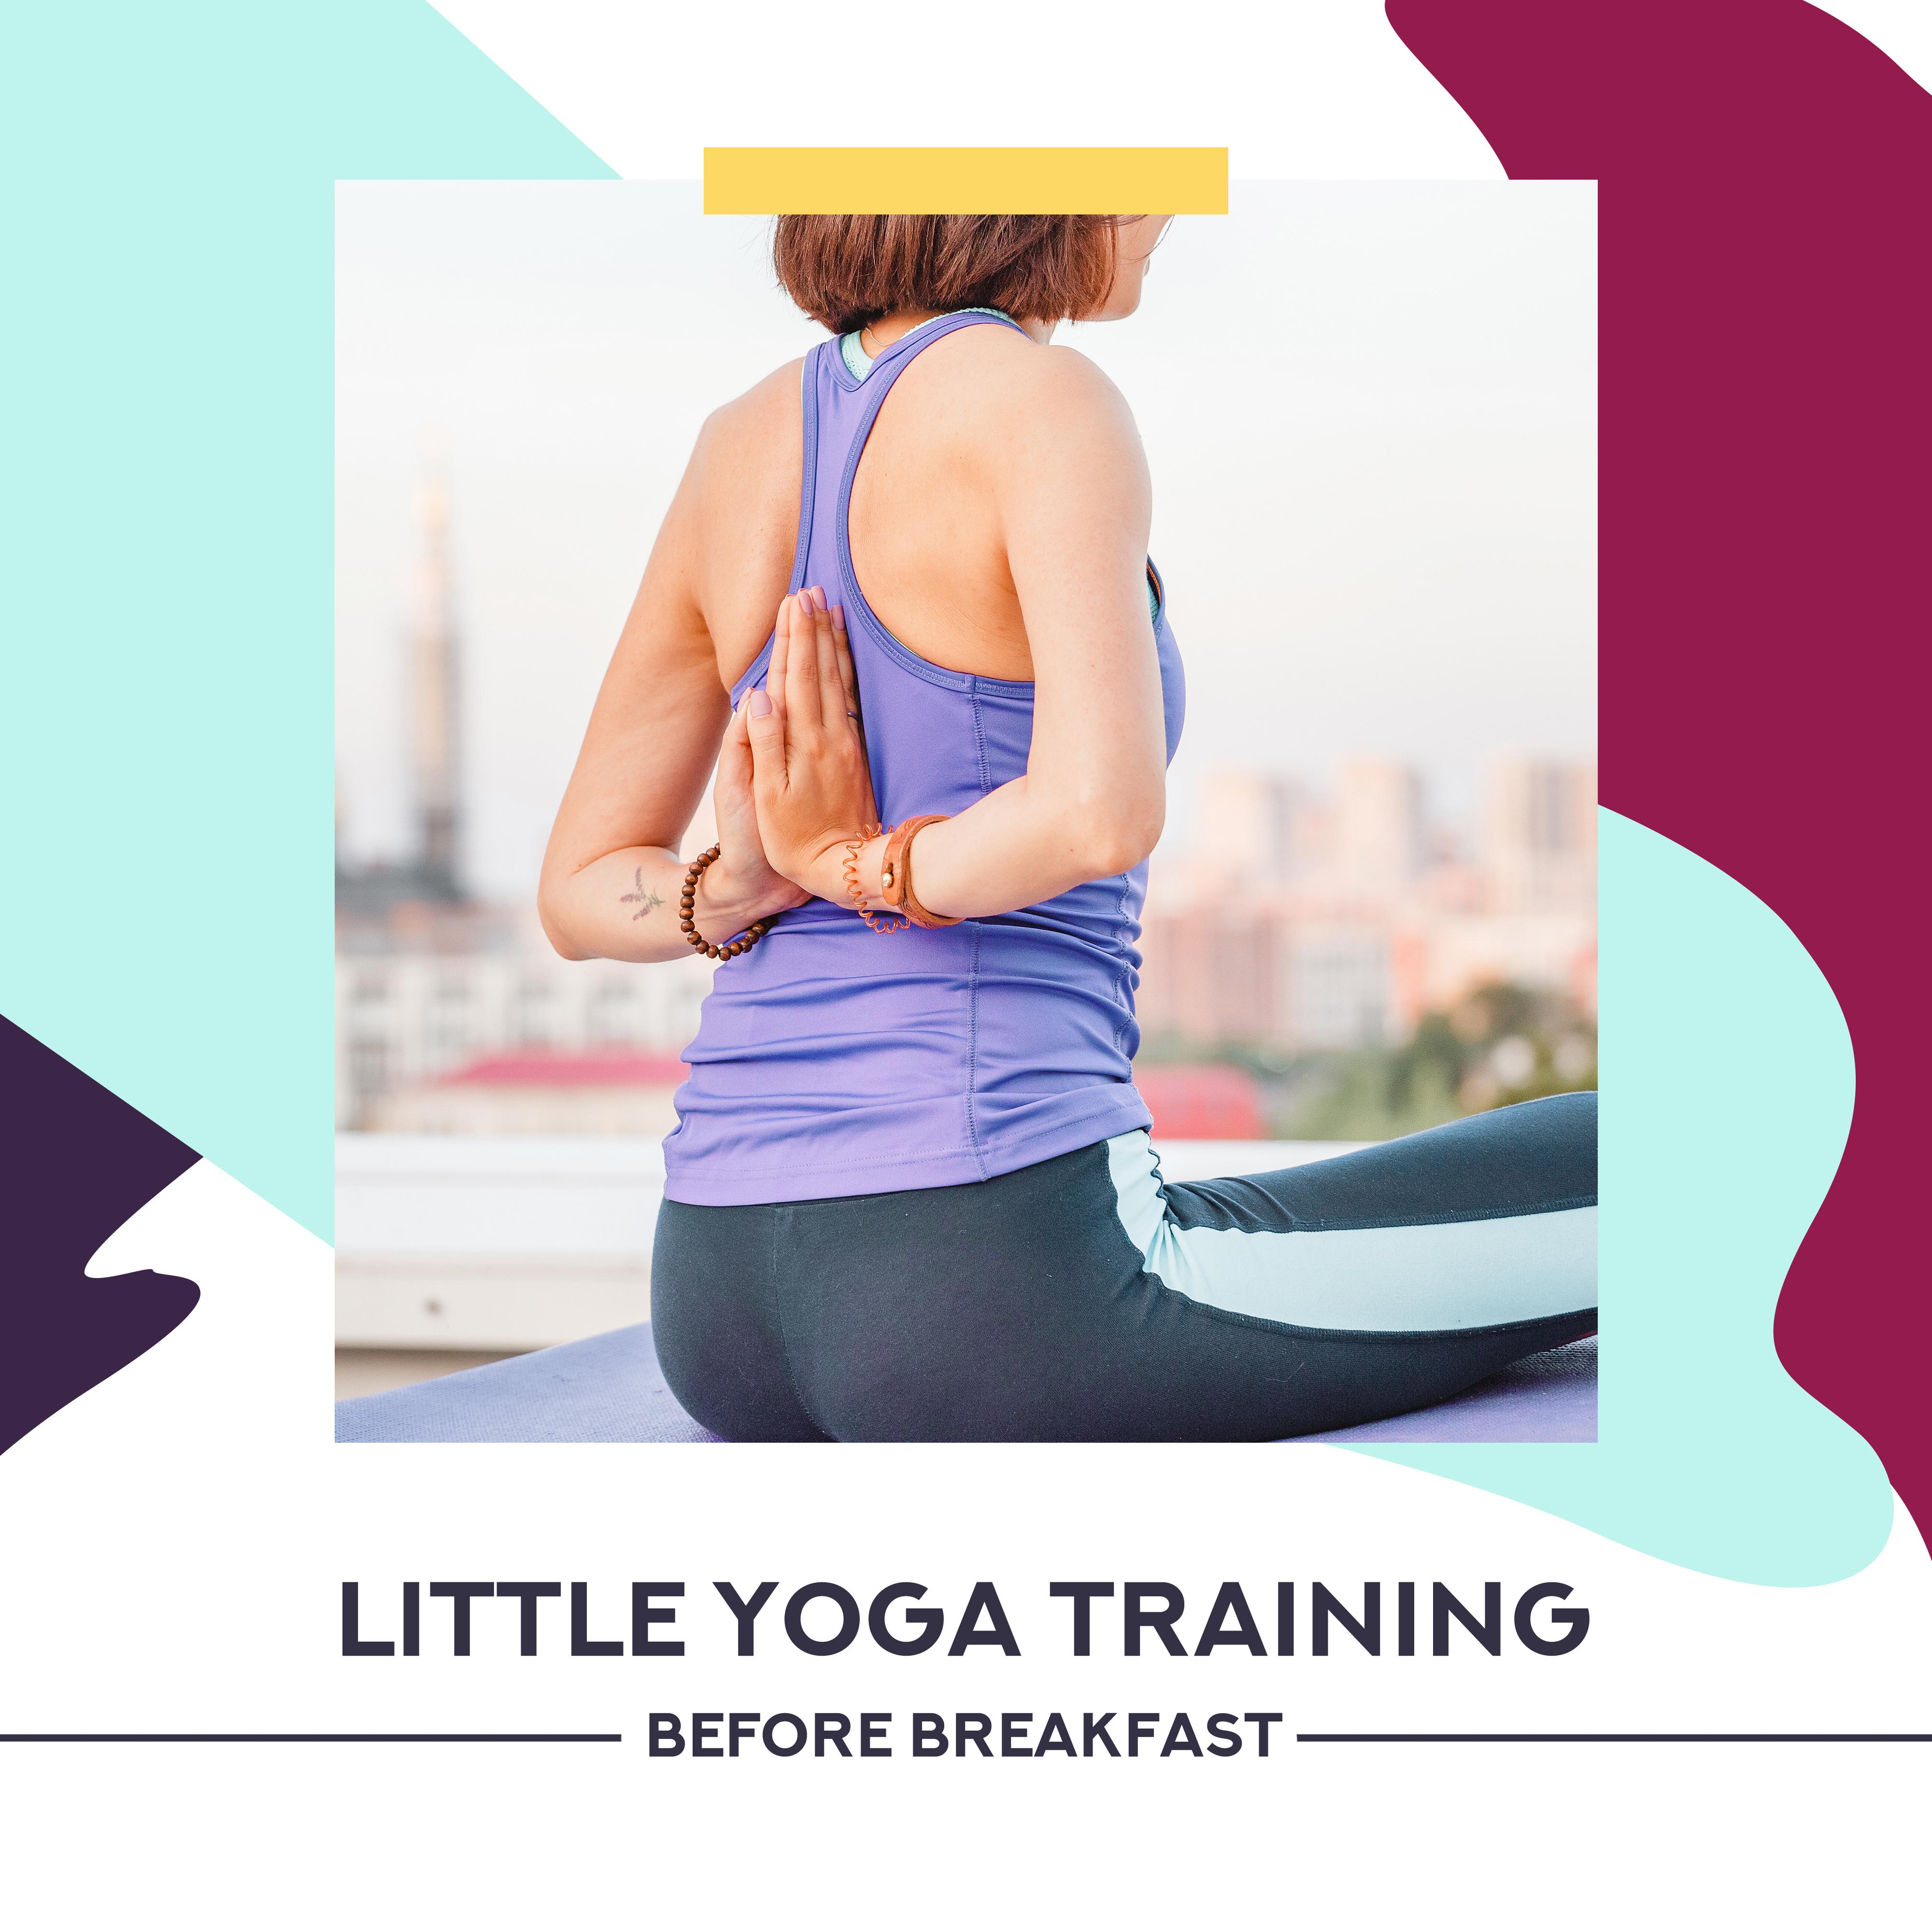 Little Yoga Training Before Breakfast: New Age Energetic Meditation & Relaxation 2019 Music for Start a Day Perfectly, Positive Dose of Good Energy, Improve Your Mood